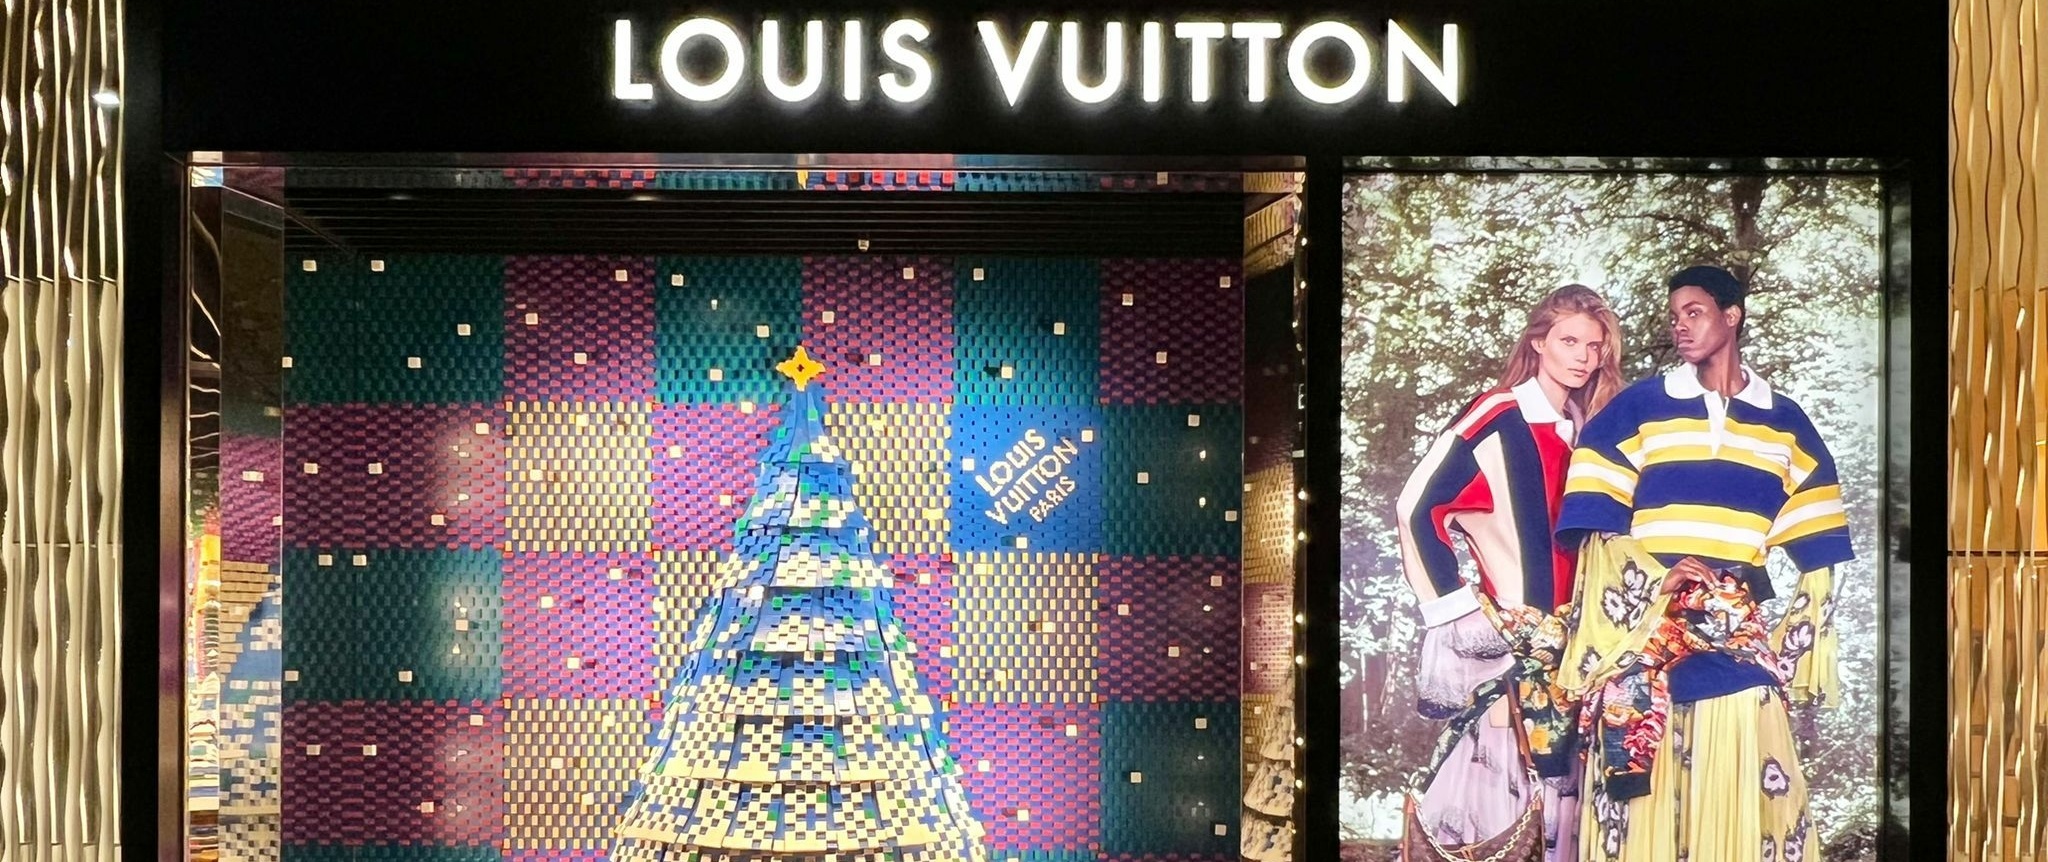 Louis Vuitton surprises LoL world champions FPX with luxury gift